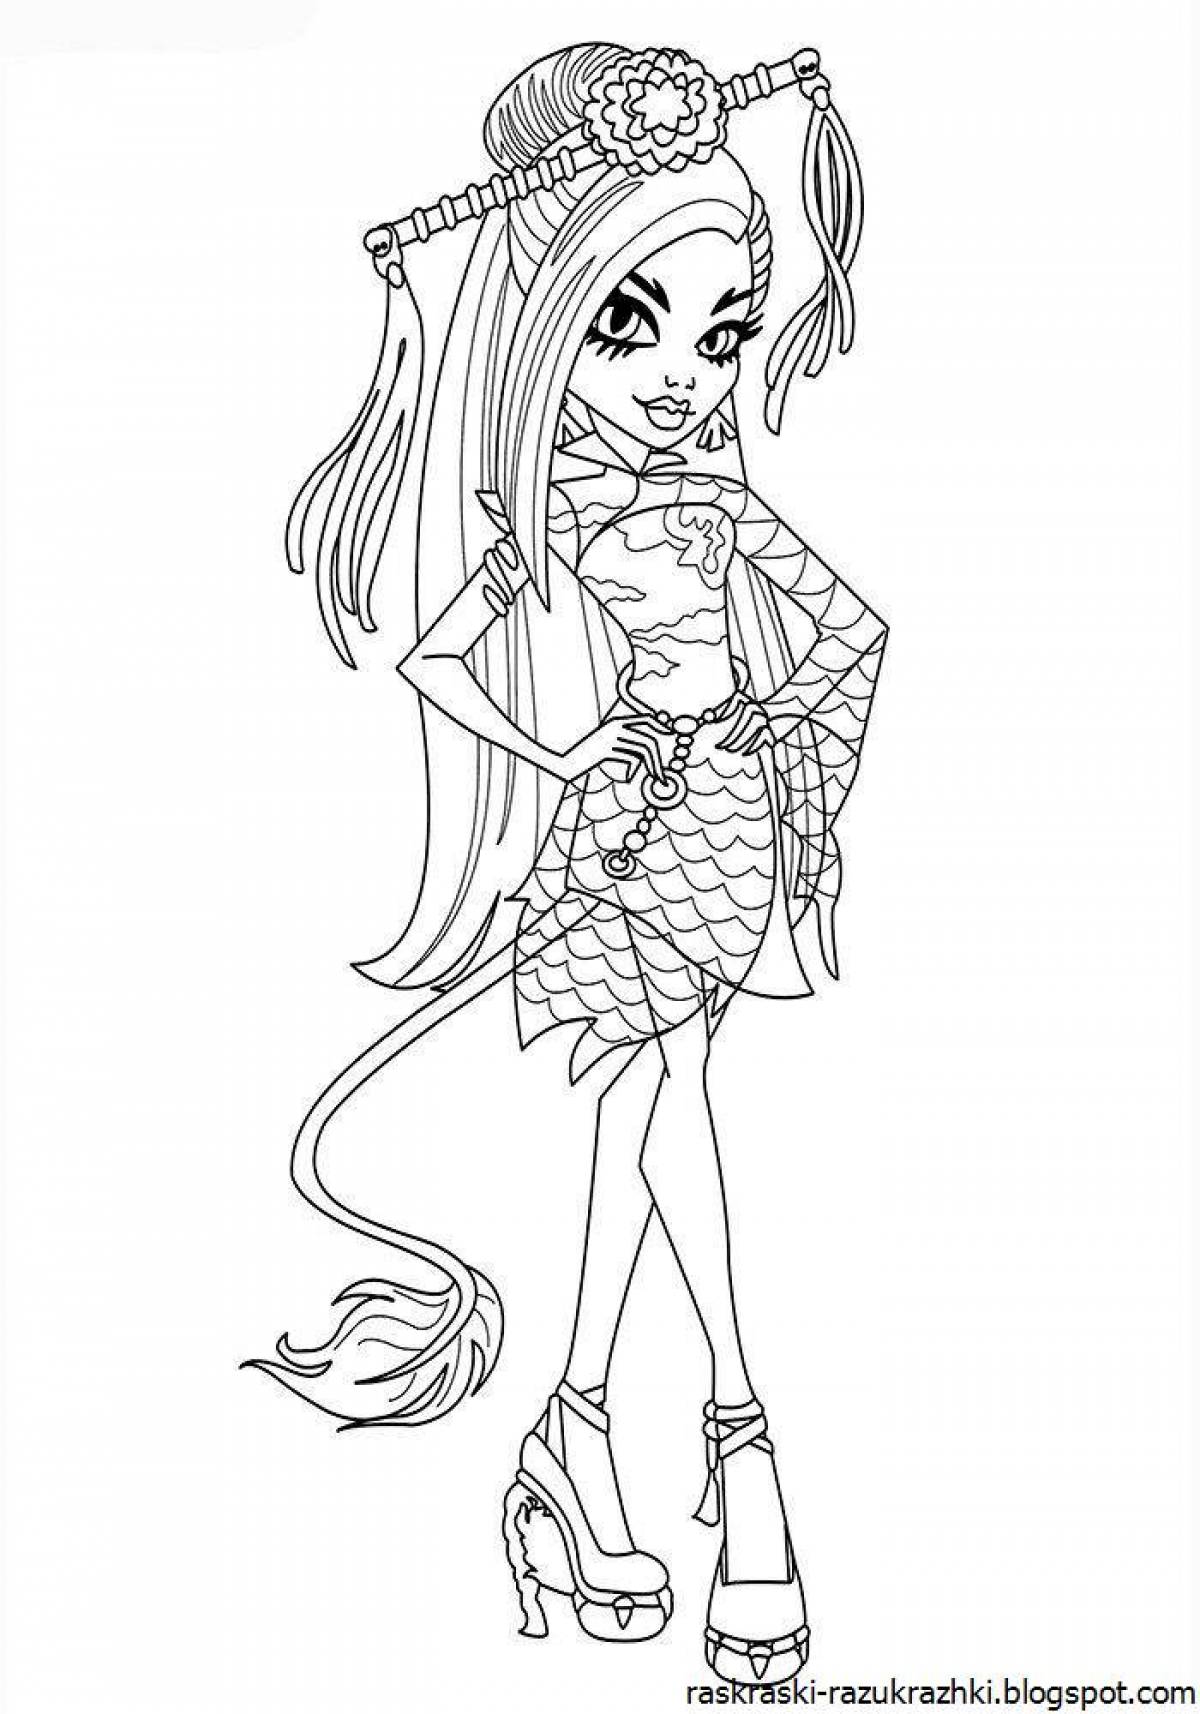 Coloring page dazzling monster school